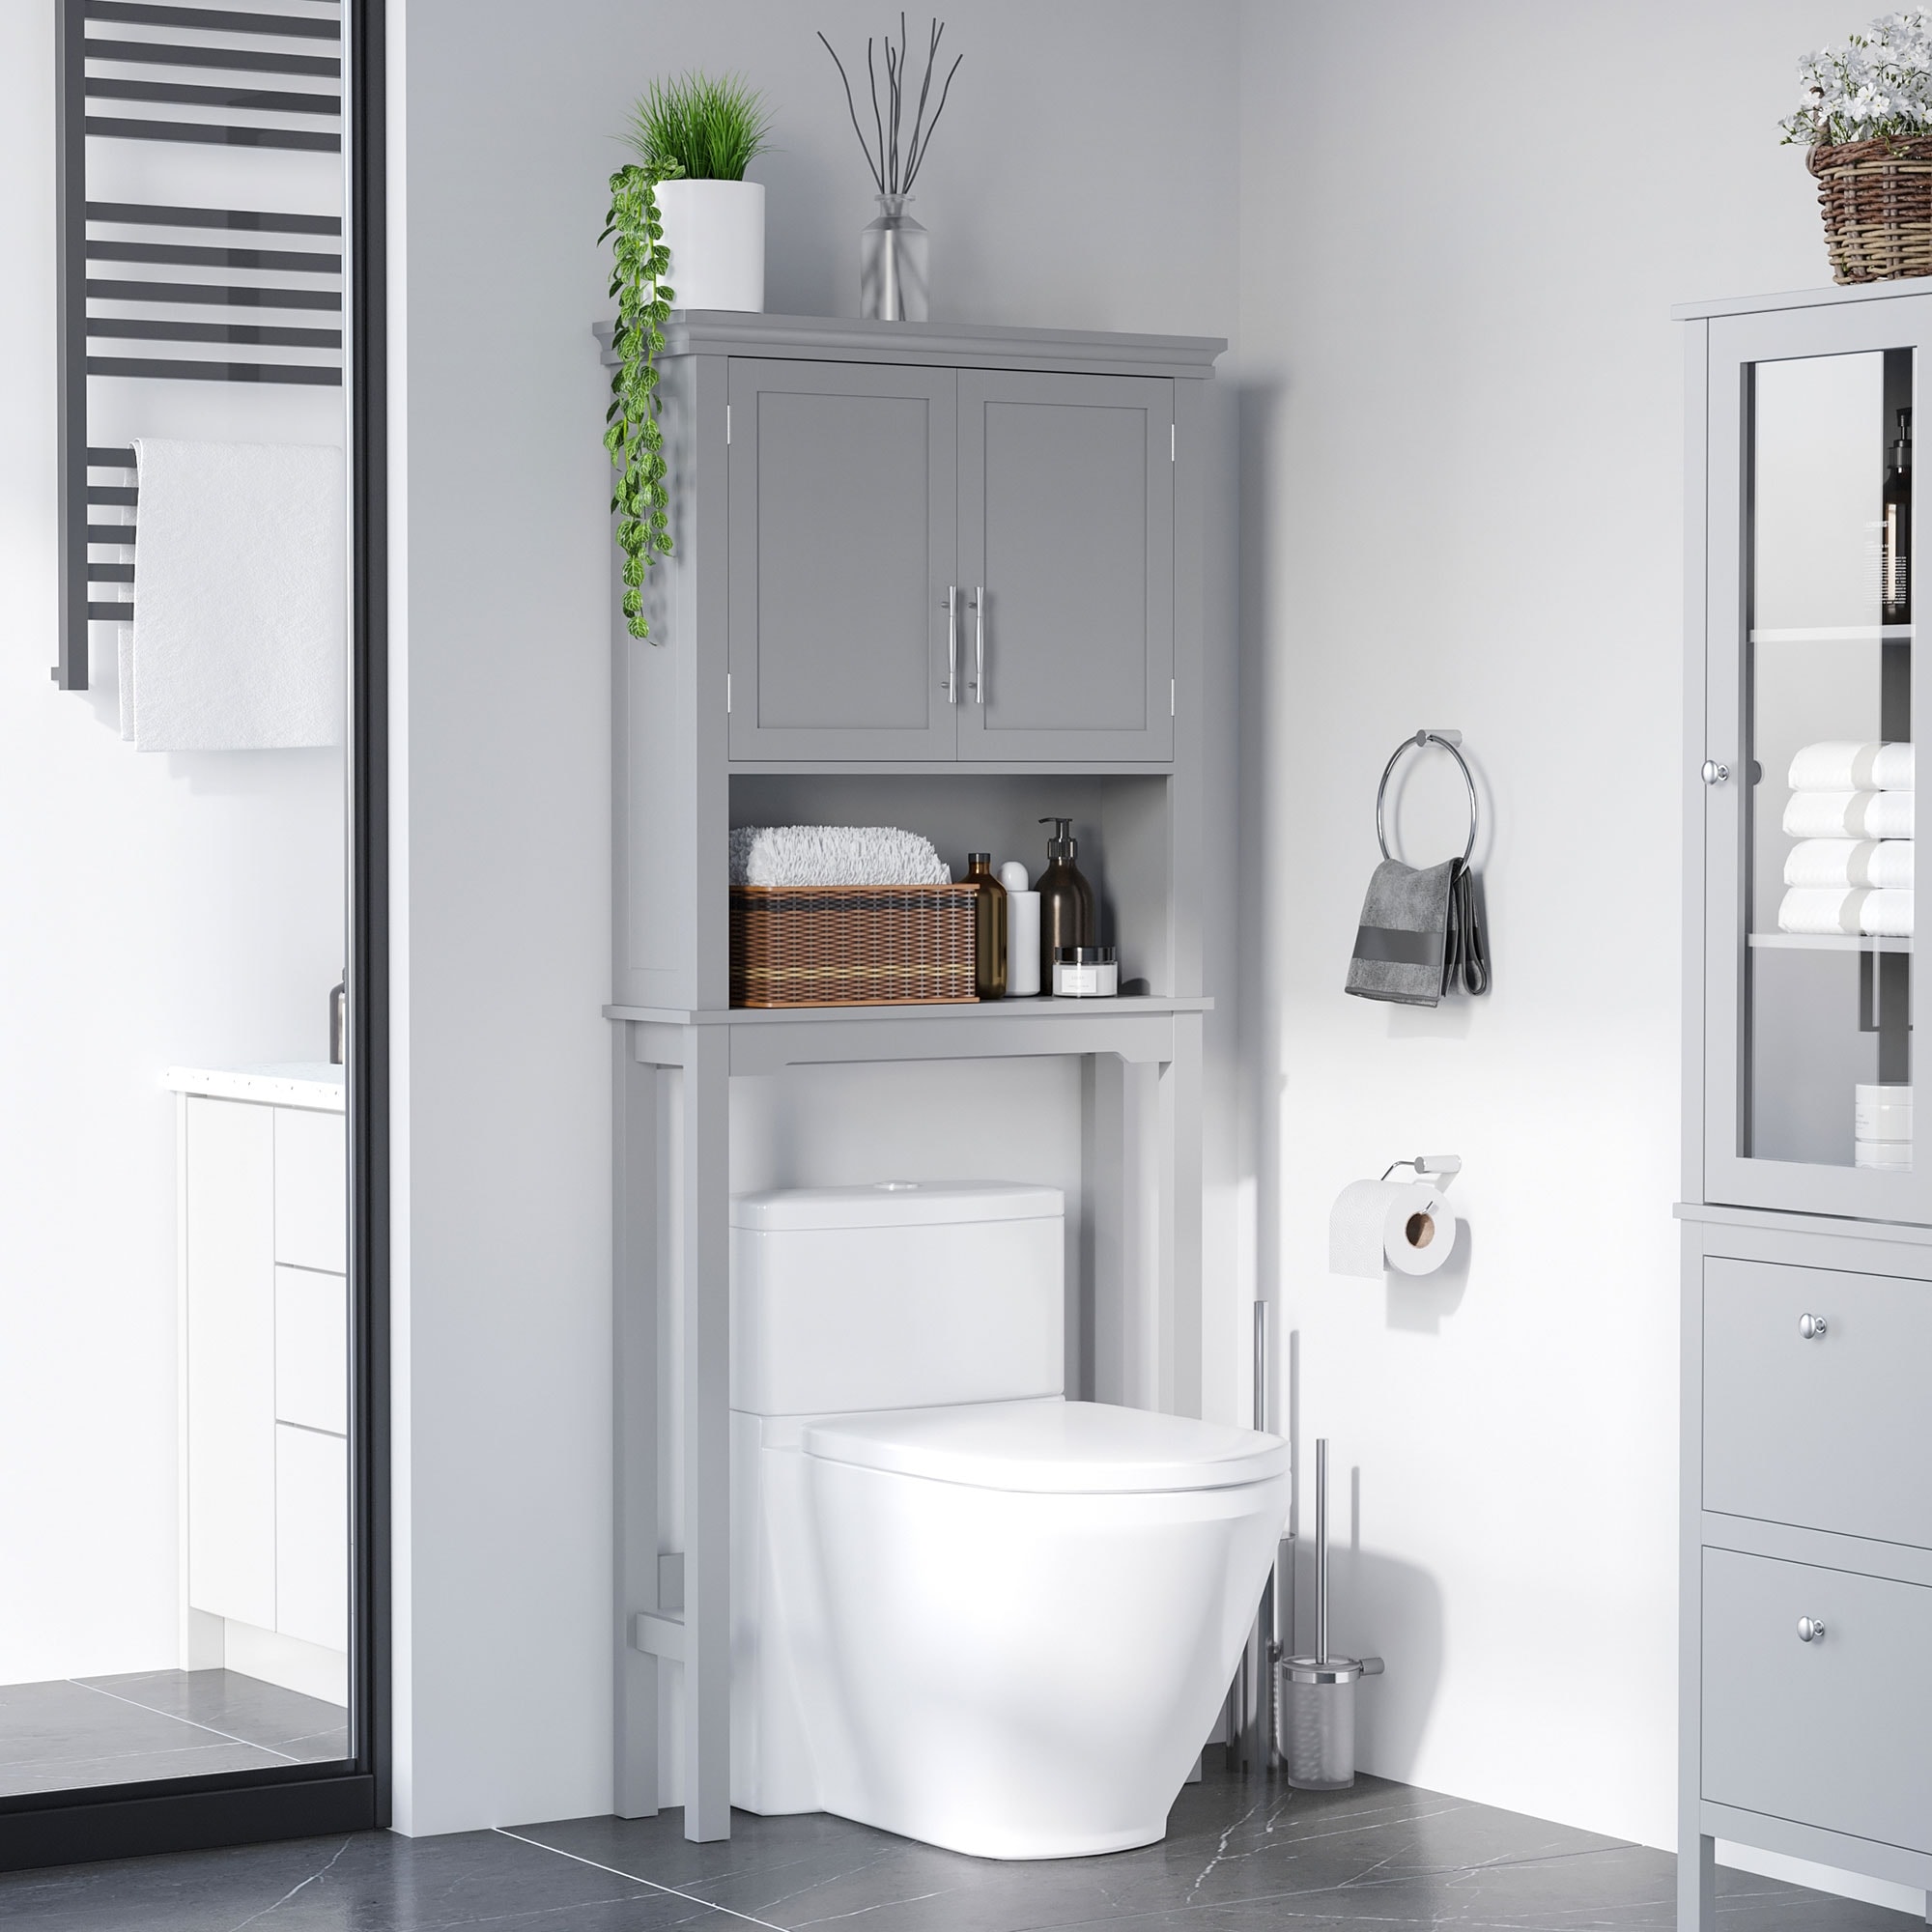 https://ak1.ostkcdn.com/images/products/is/images/direct/198b3f3b7a9725bddedeeedcc7fe6d7eaec7f591/kleankin-Modern-Over-The-Toilet-Storage-Cabinet%2C-Double-Door-Bathroom-Organizer.jpg